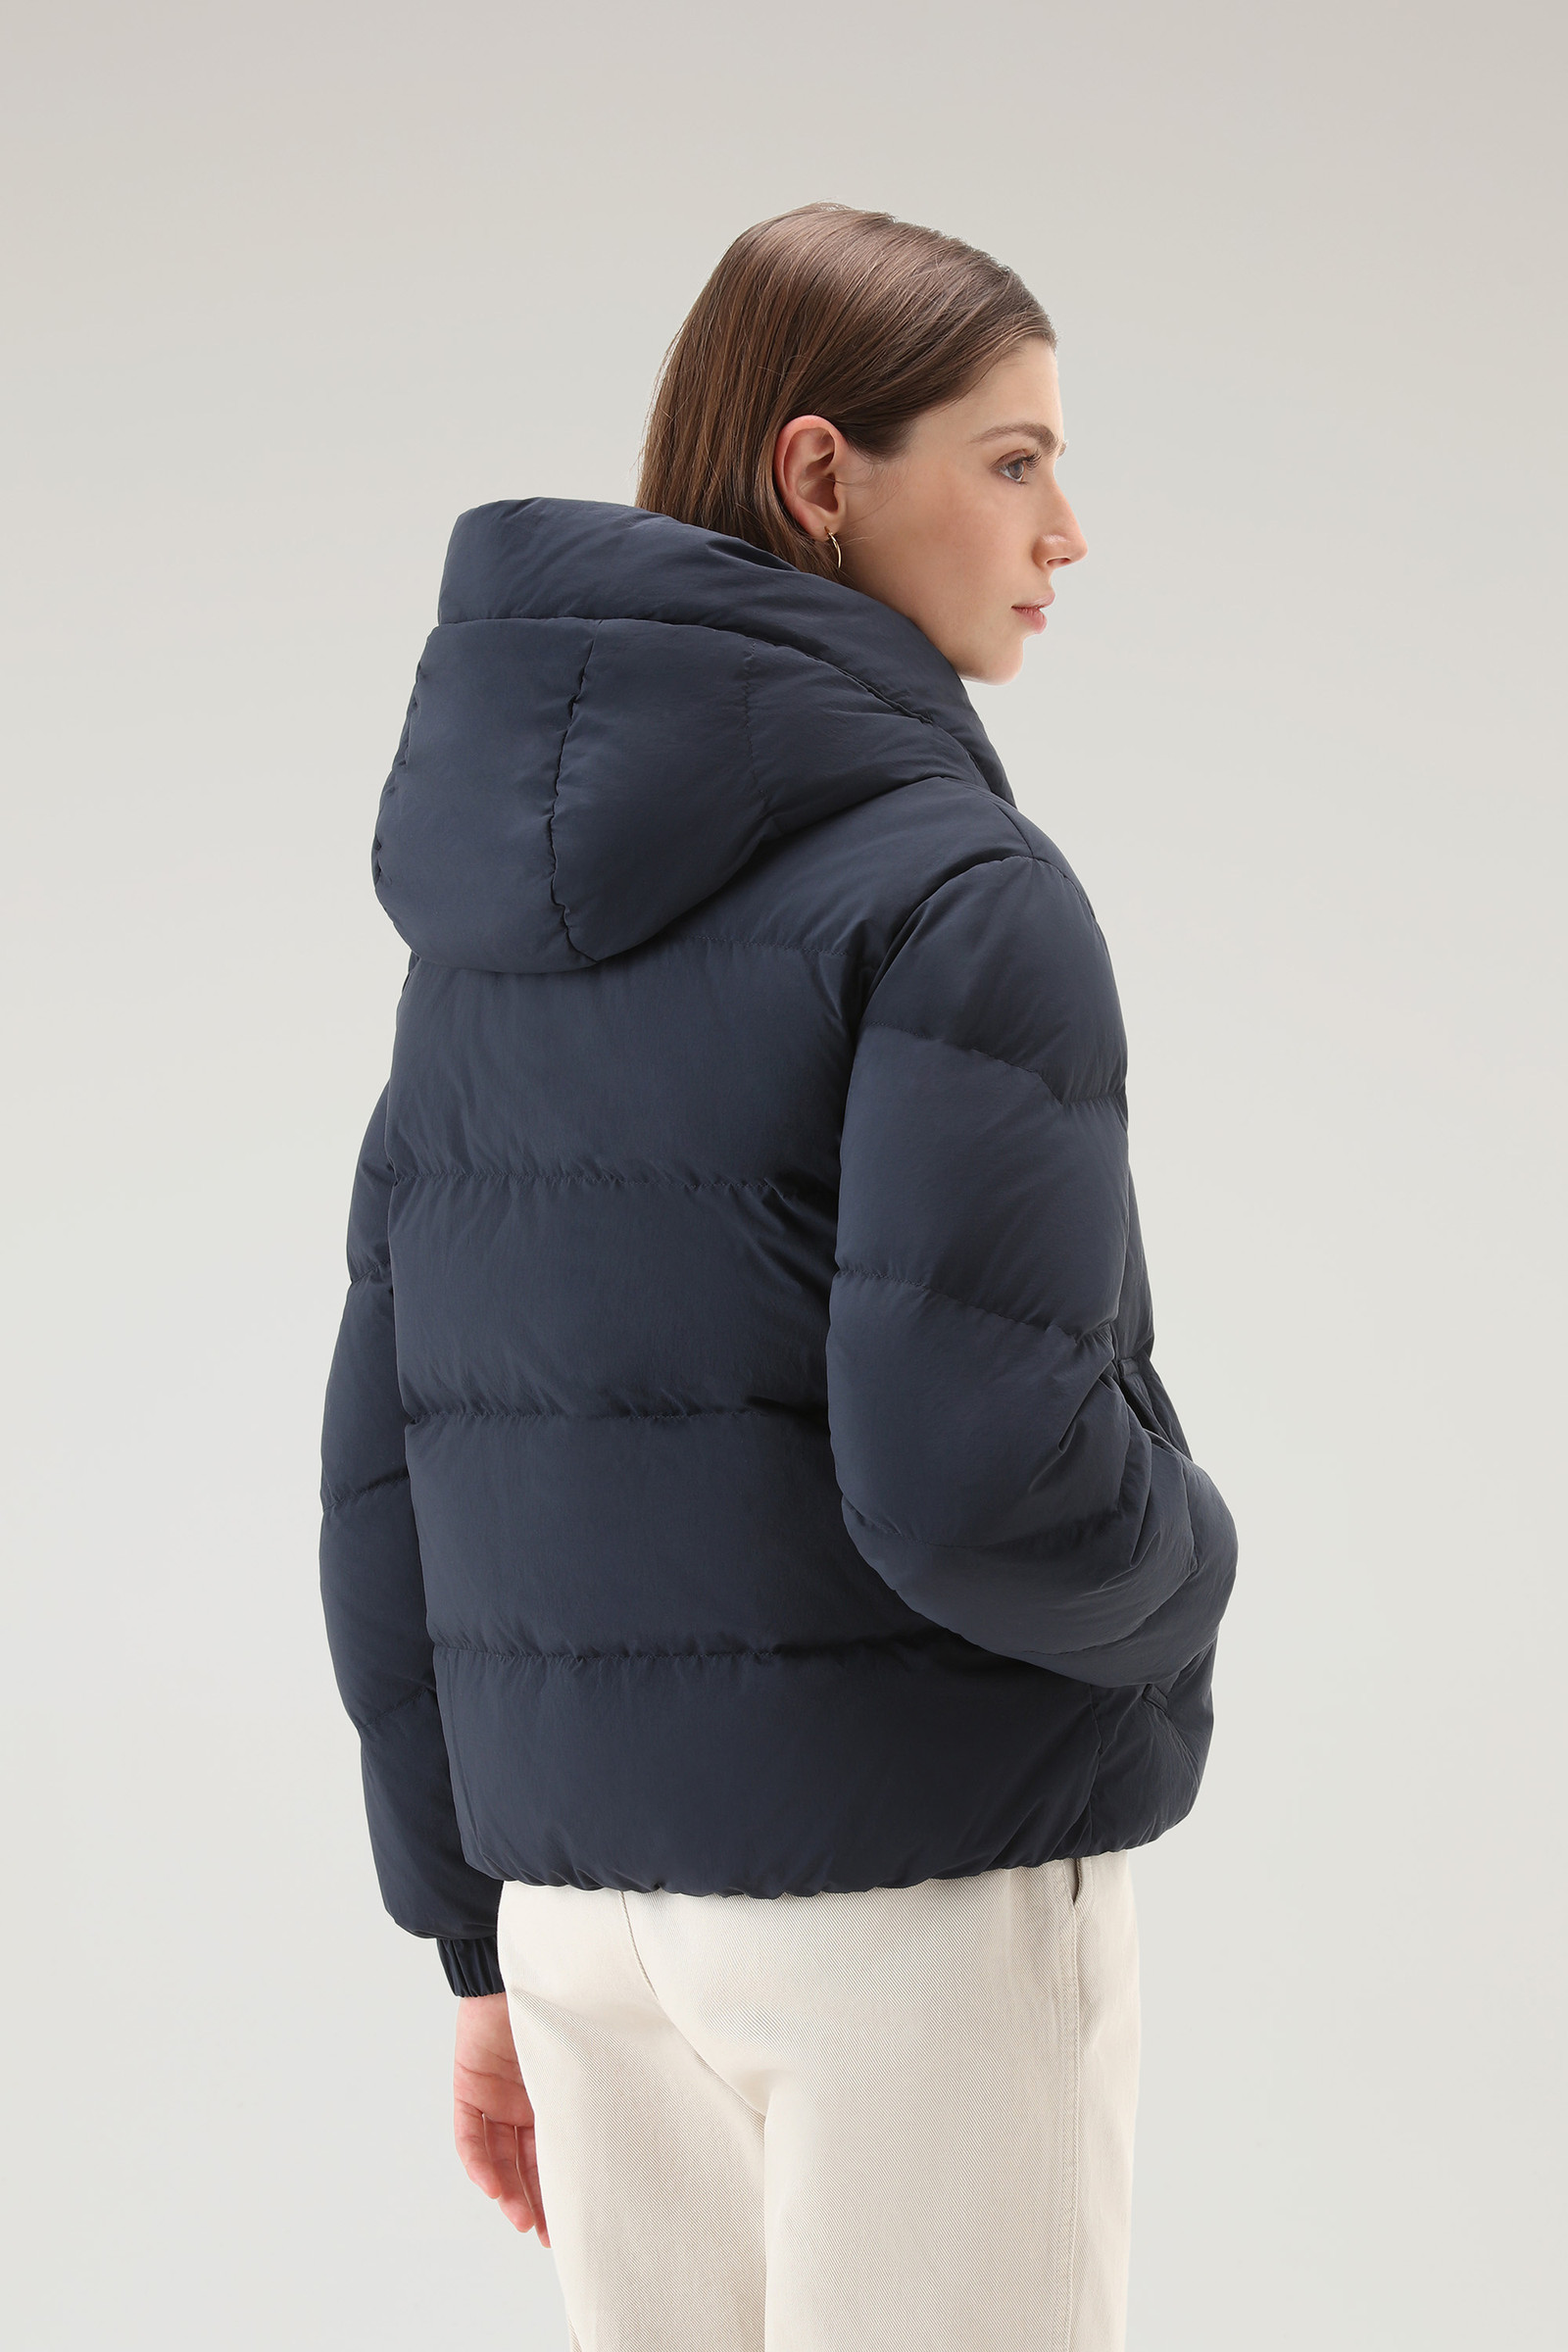 Women's Quilted Down Jacket in Eco Taslan Nylon with Detachable Hood ...